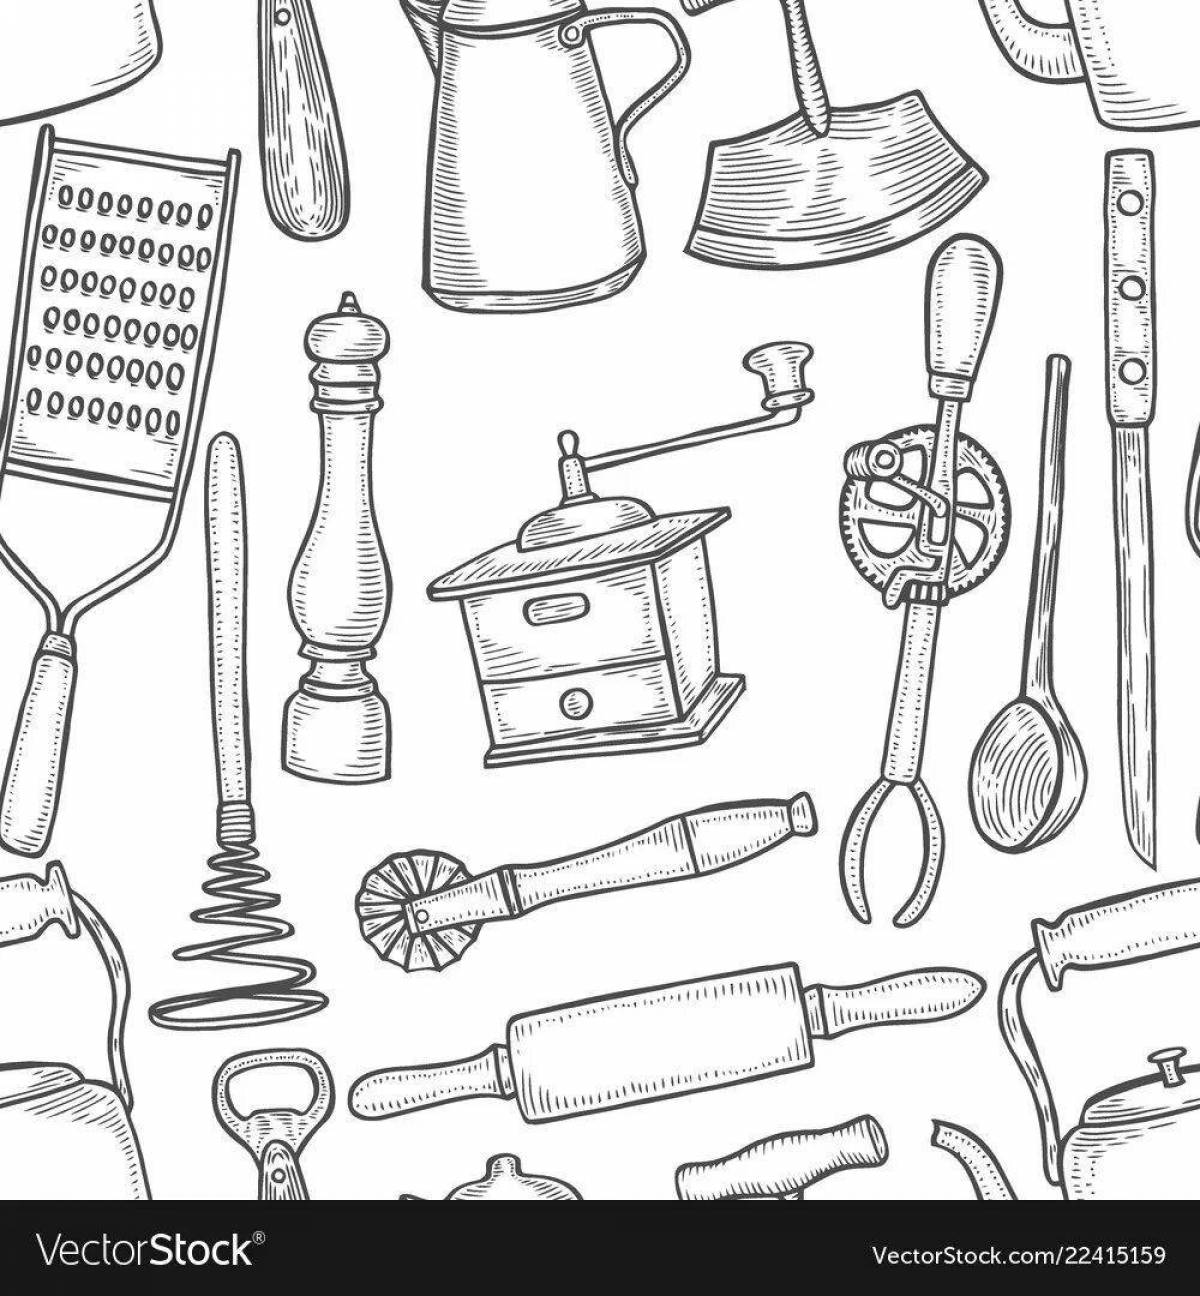 Amazing Kitchen Tools Coloring Page